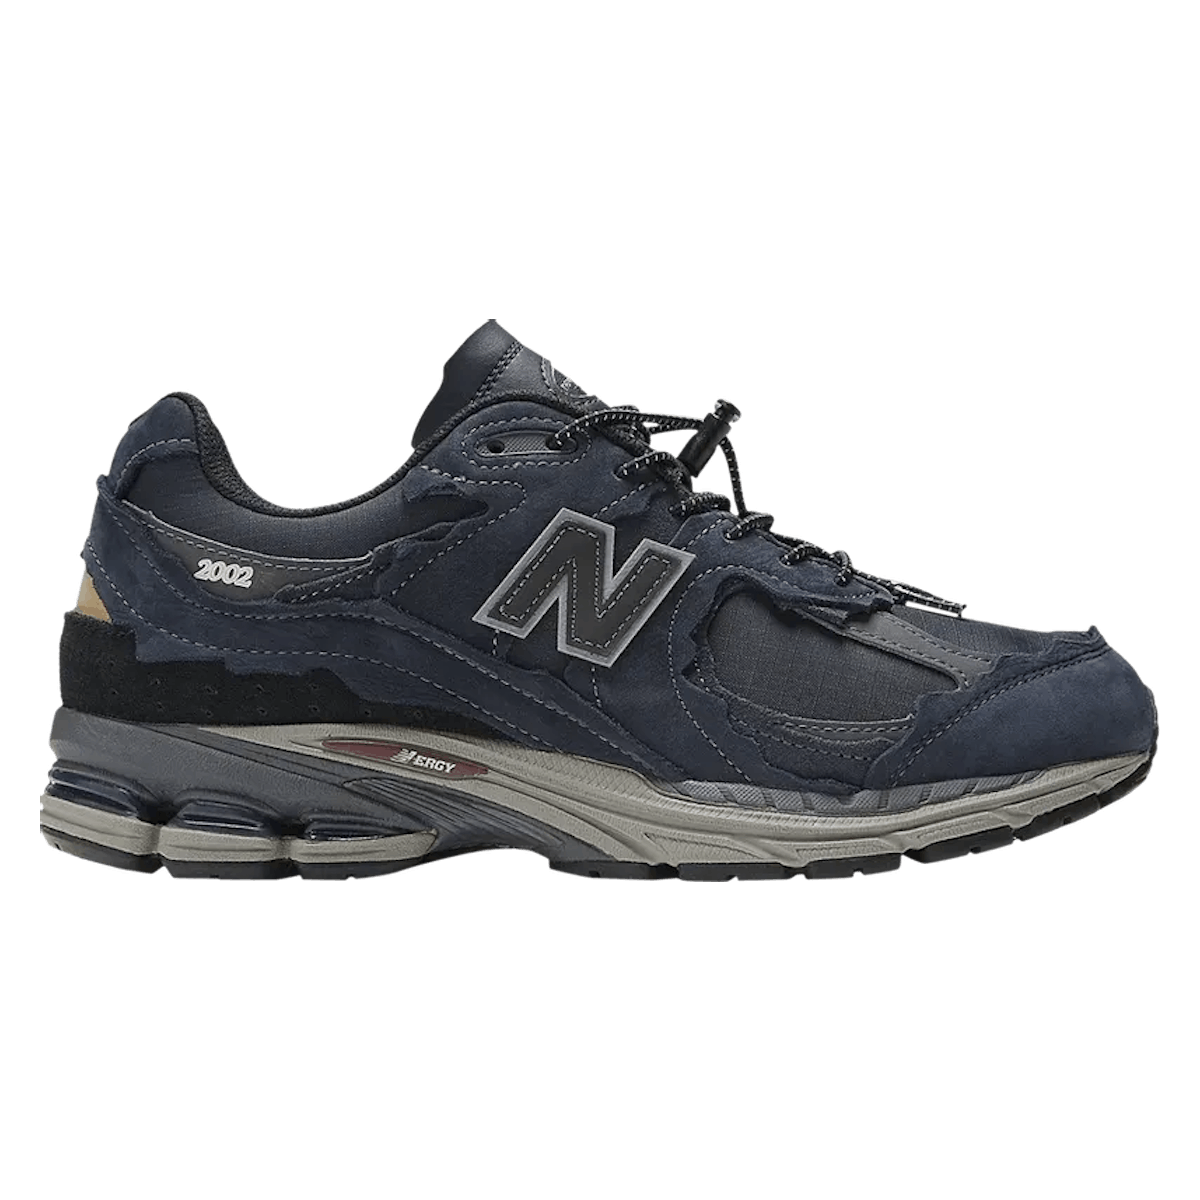 New Balance 2002R Protection Pack "Eclipse"